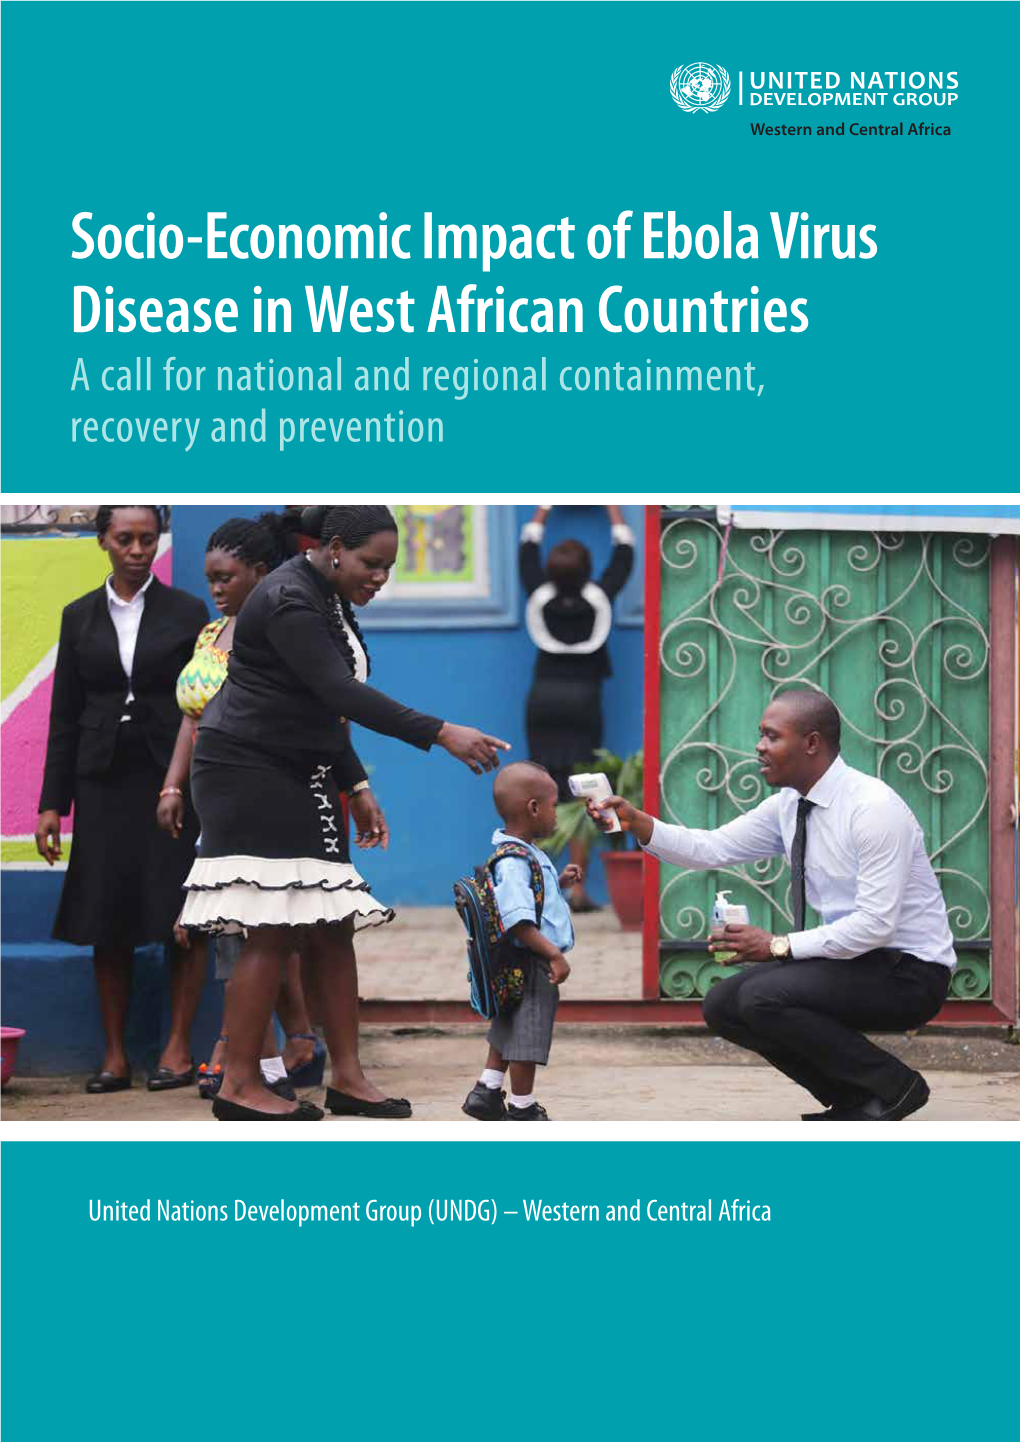 Socio-Economic Impact of Ebola Virus Disease in West African Countries a Call for National and Regional Containment, Recovery and Prevention